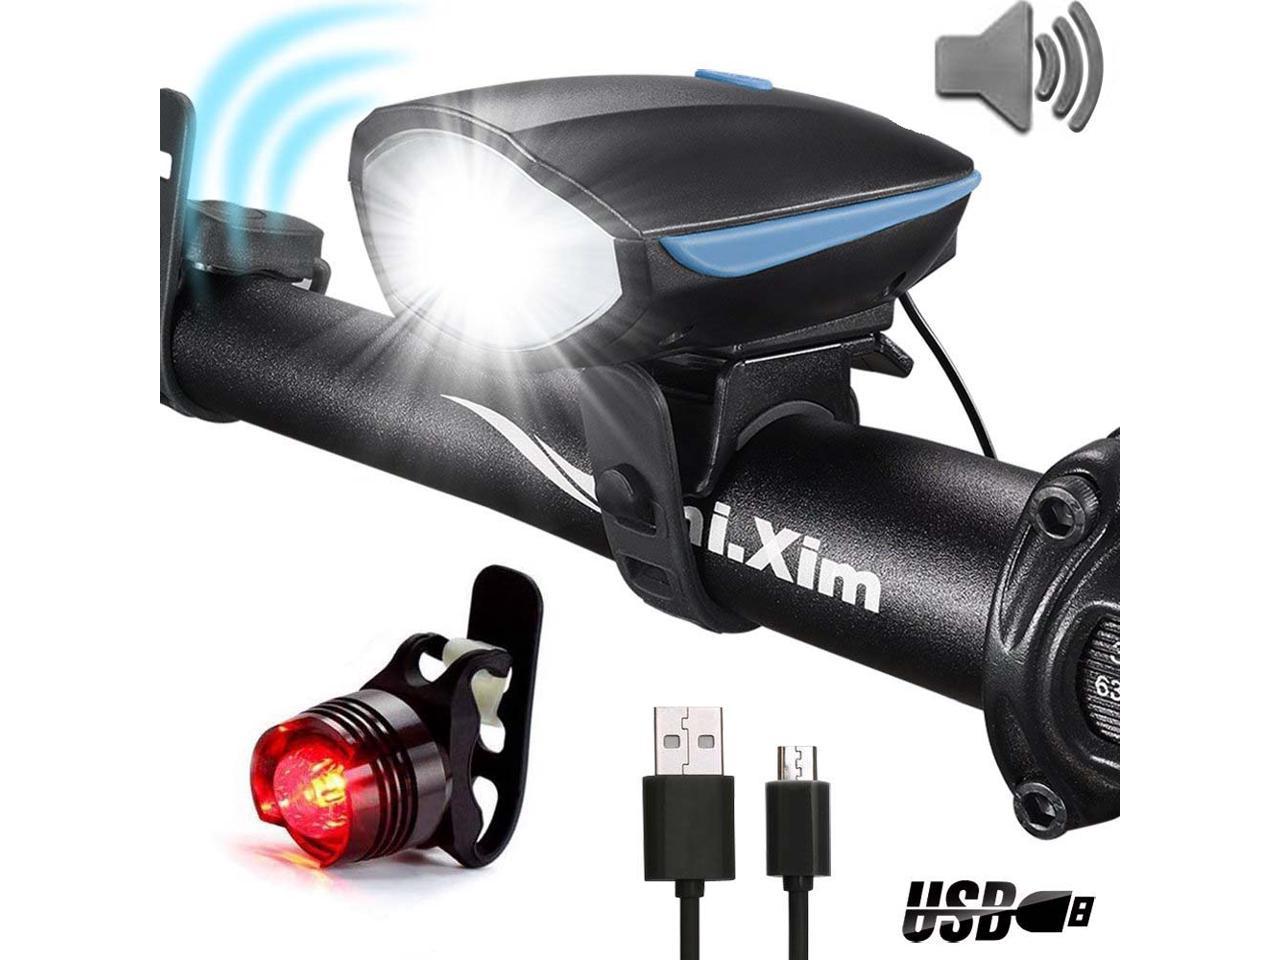 Bike Bicycle Cycle Safety Super Bright Front & Rear Back LED Torch Light Kit Set 